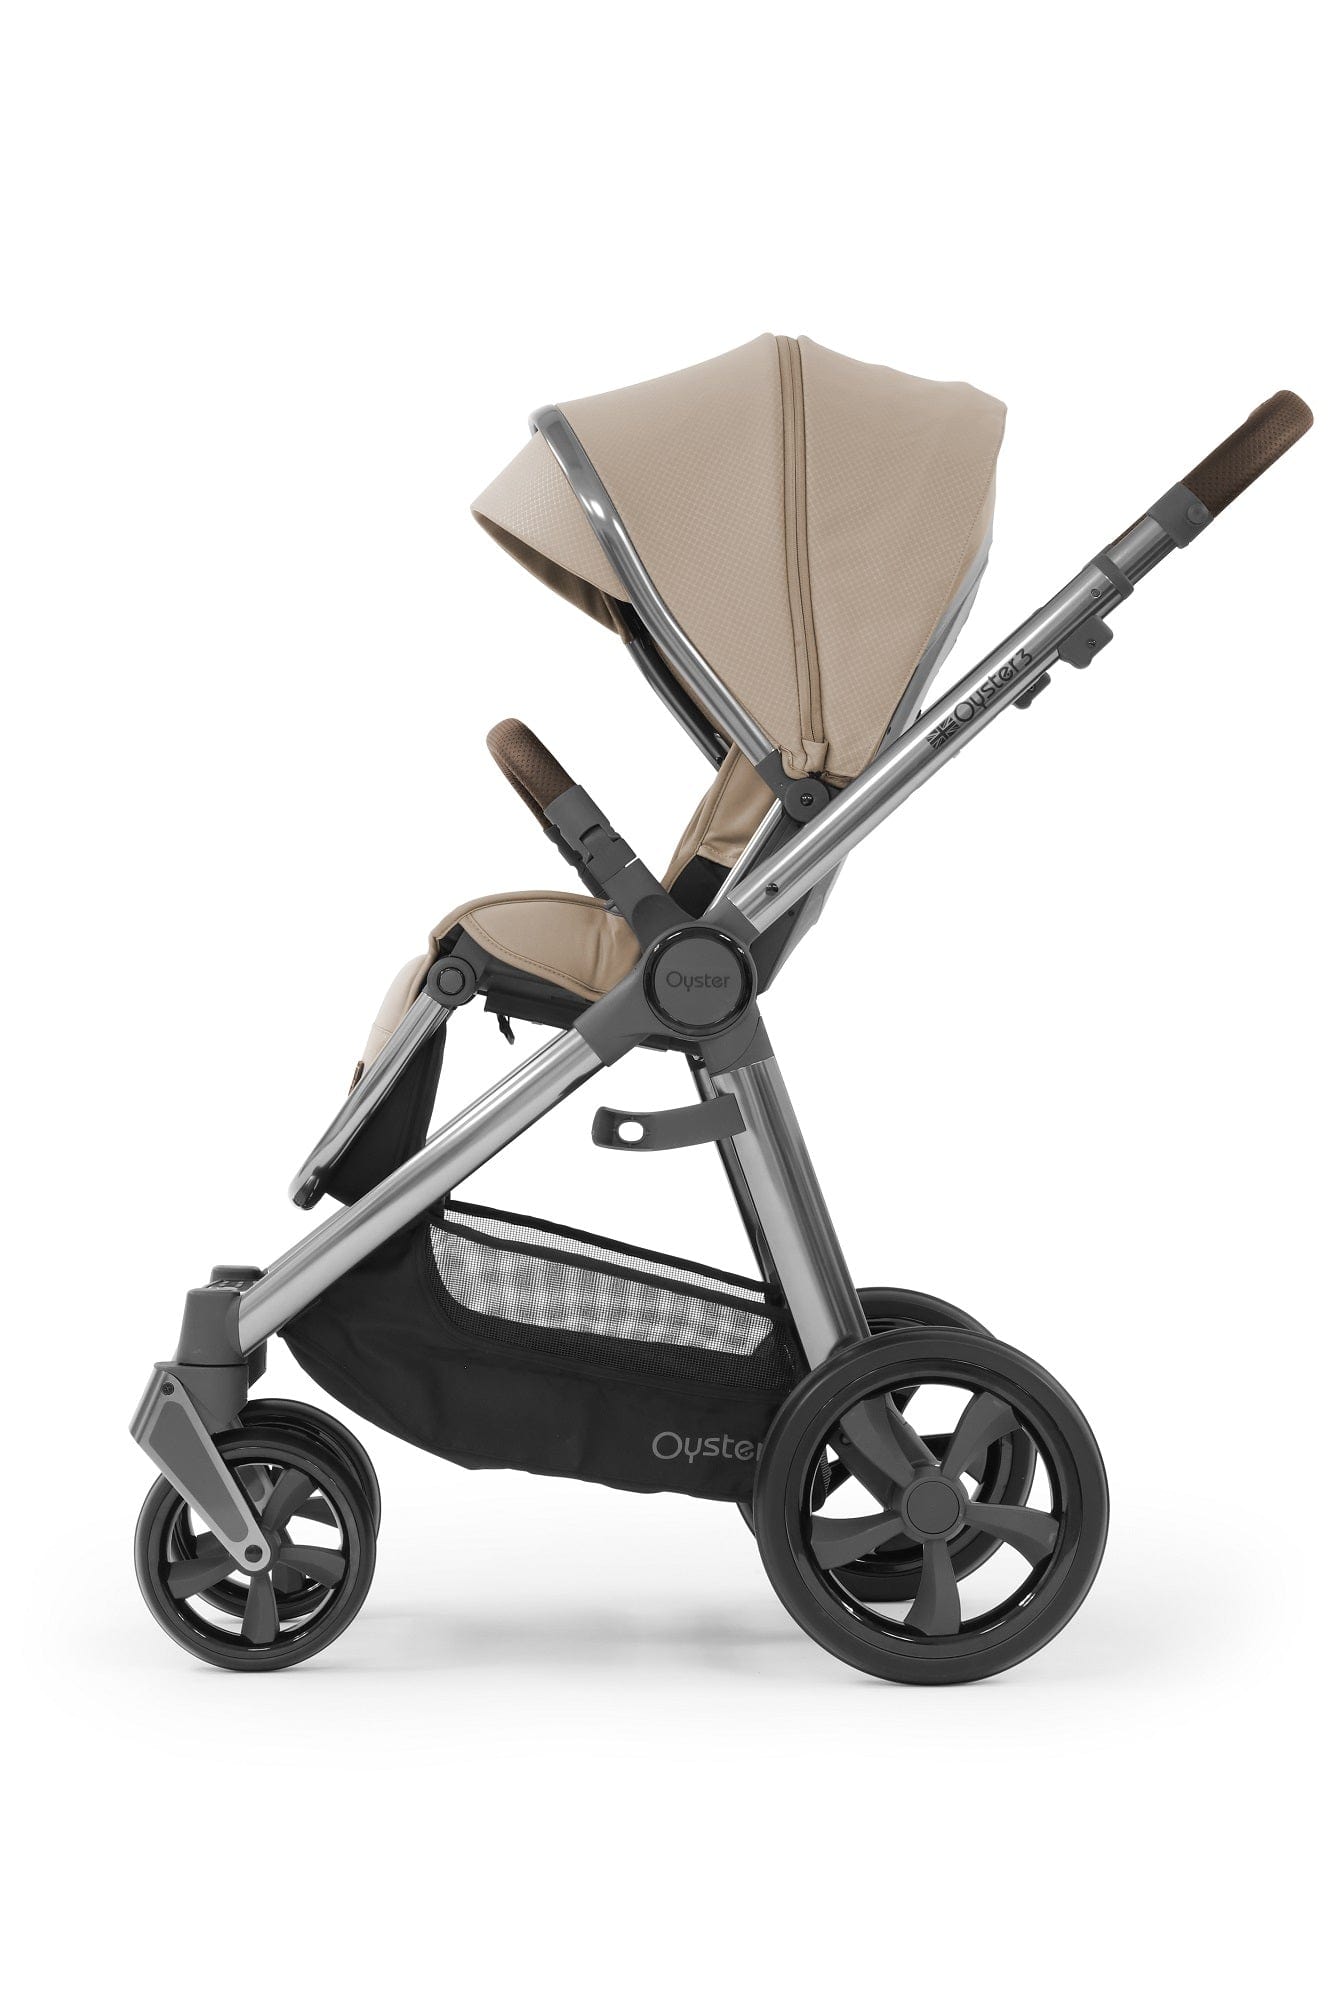 Babystyle Oyster 3 Pushchair - Butterscotch *Check availability before ordering